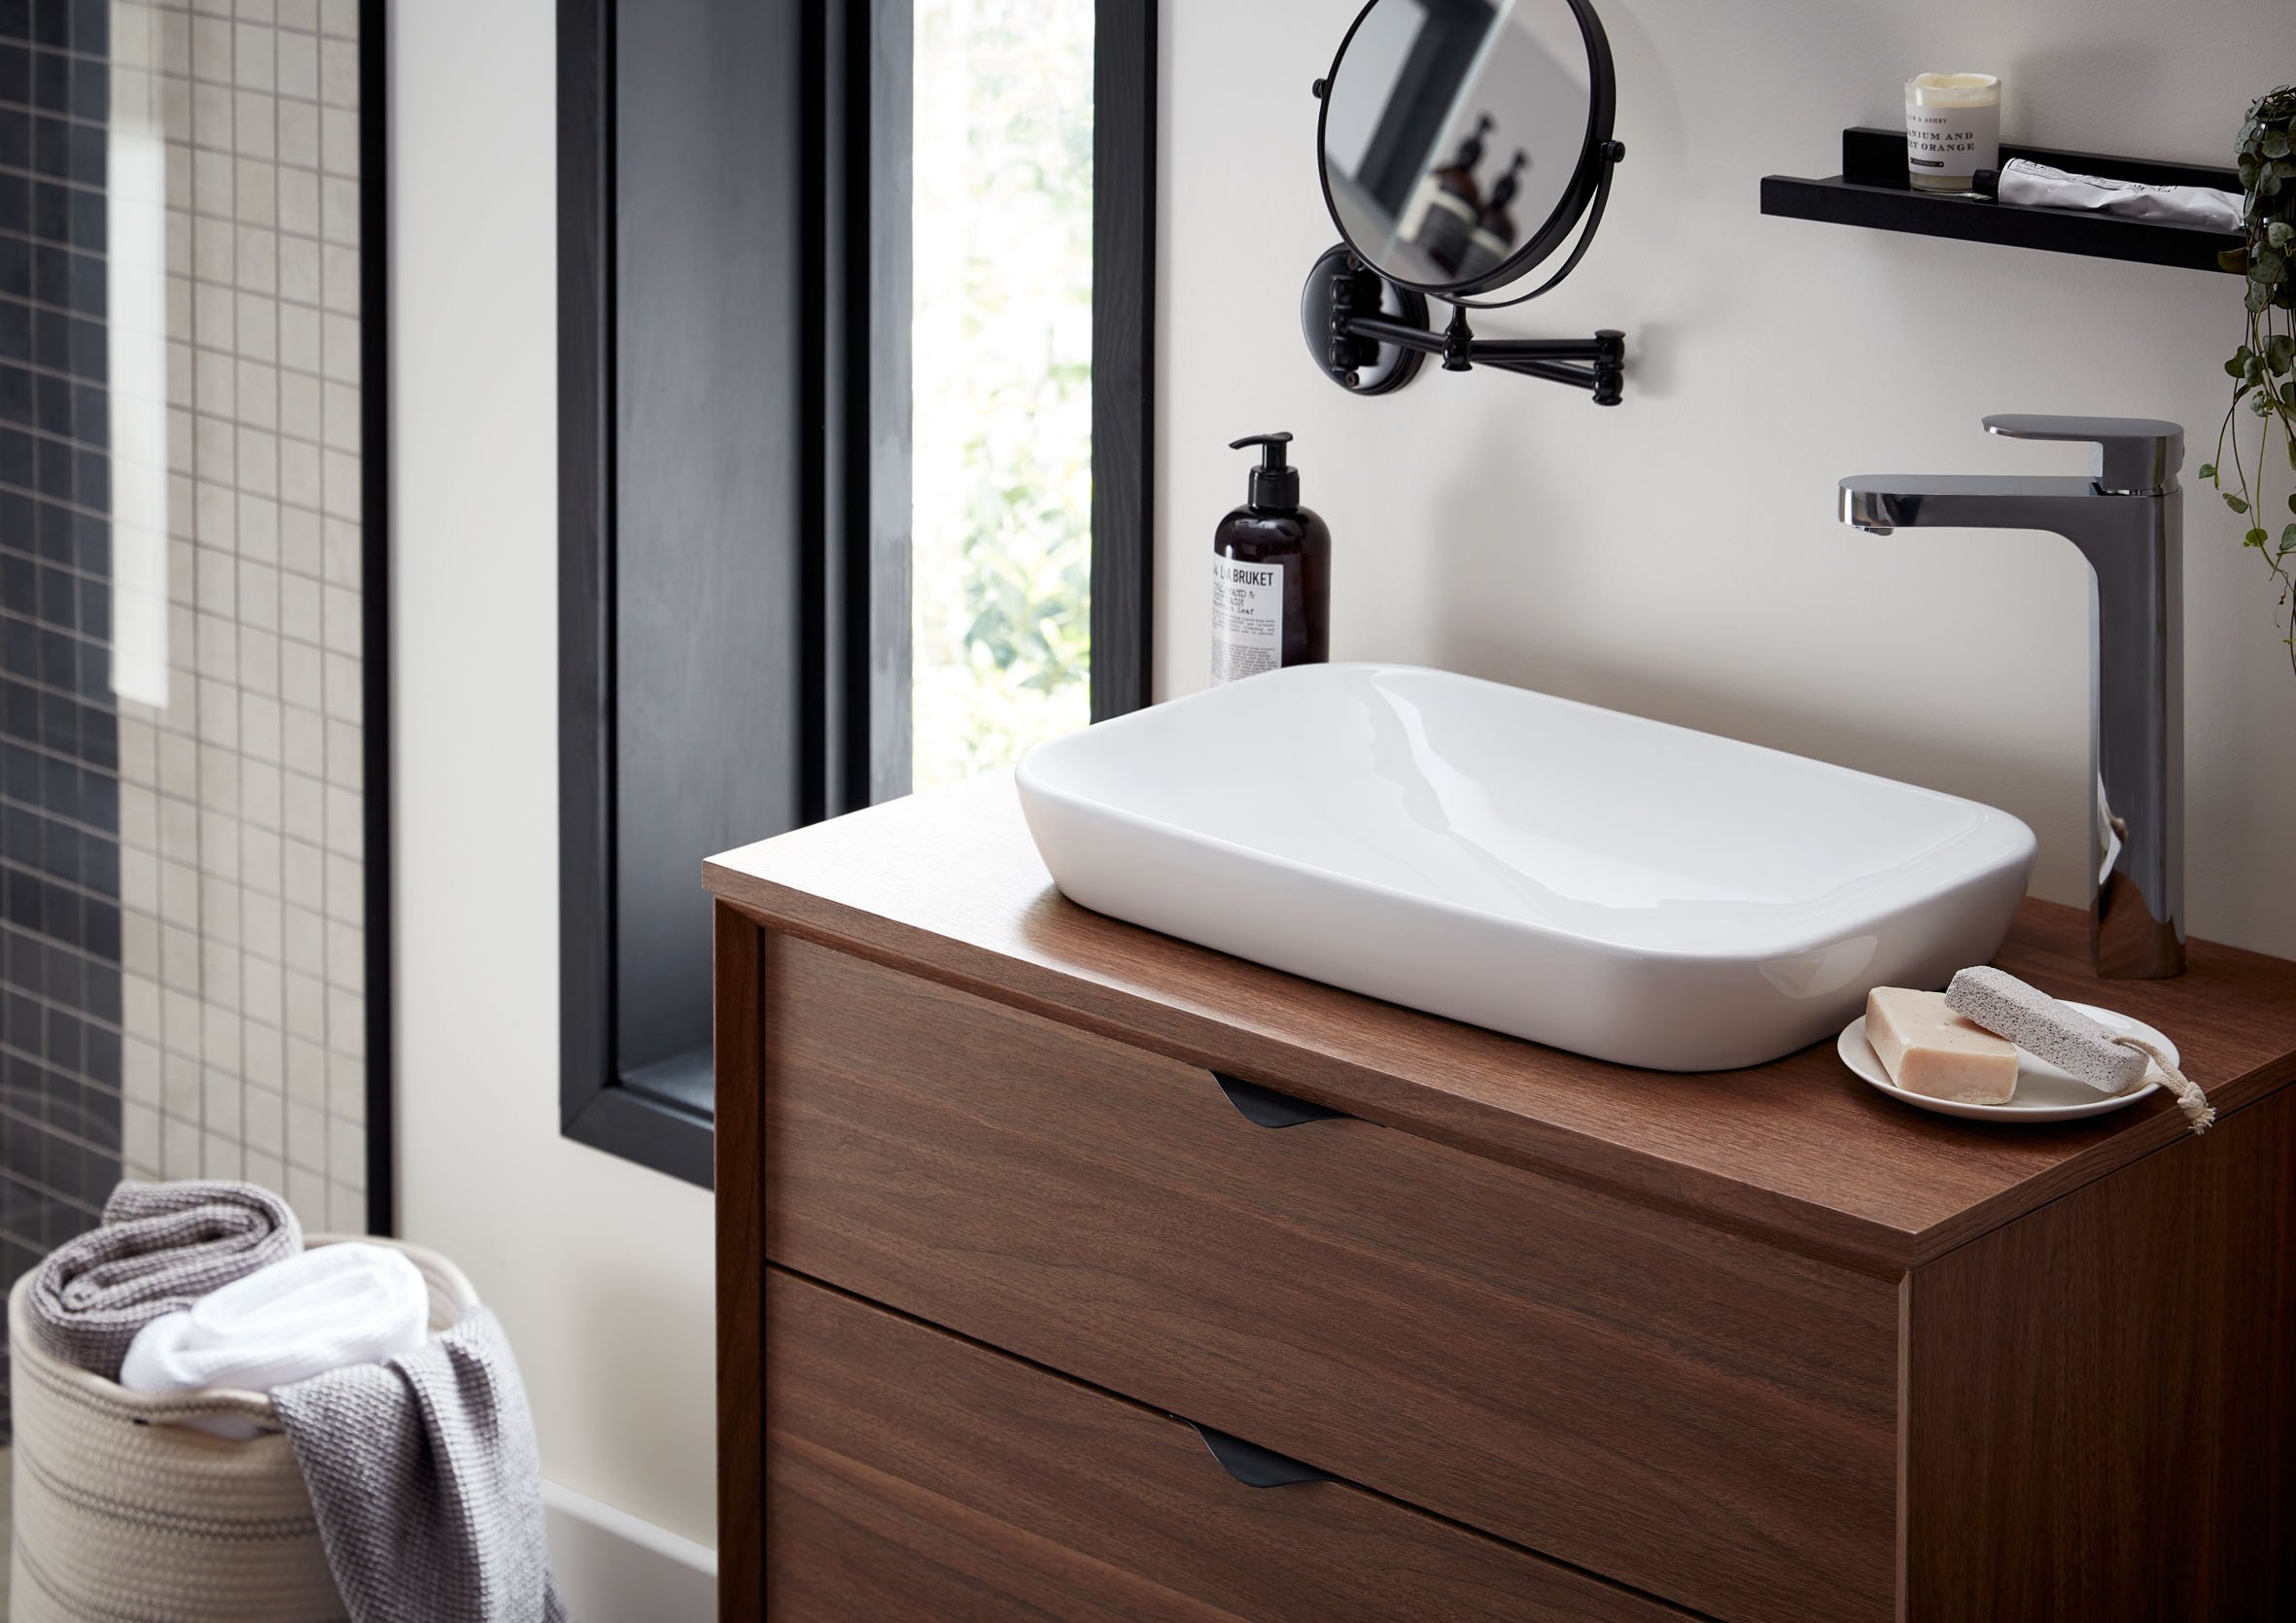 Design Ideas for a Wooden Effect in Your Bathroom